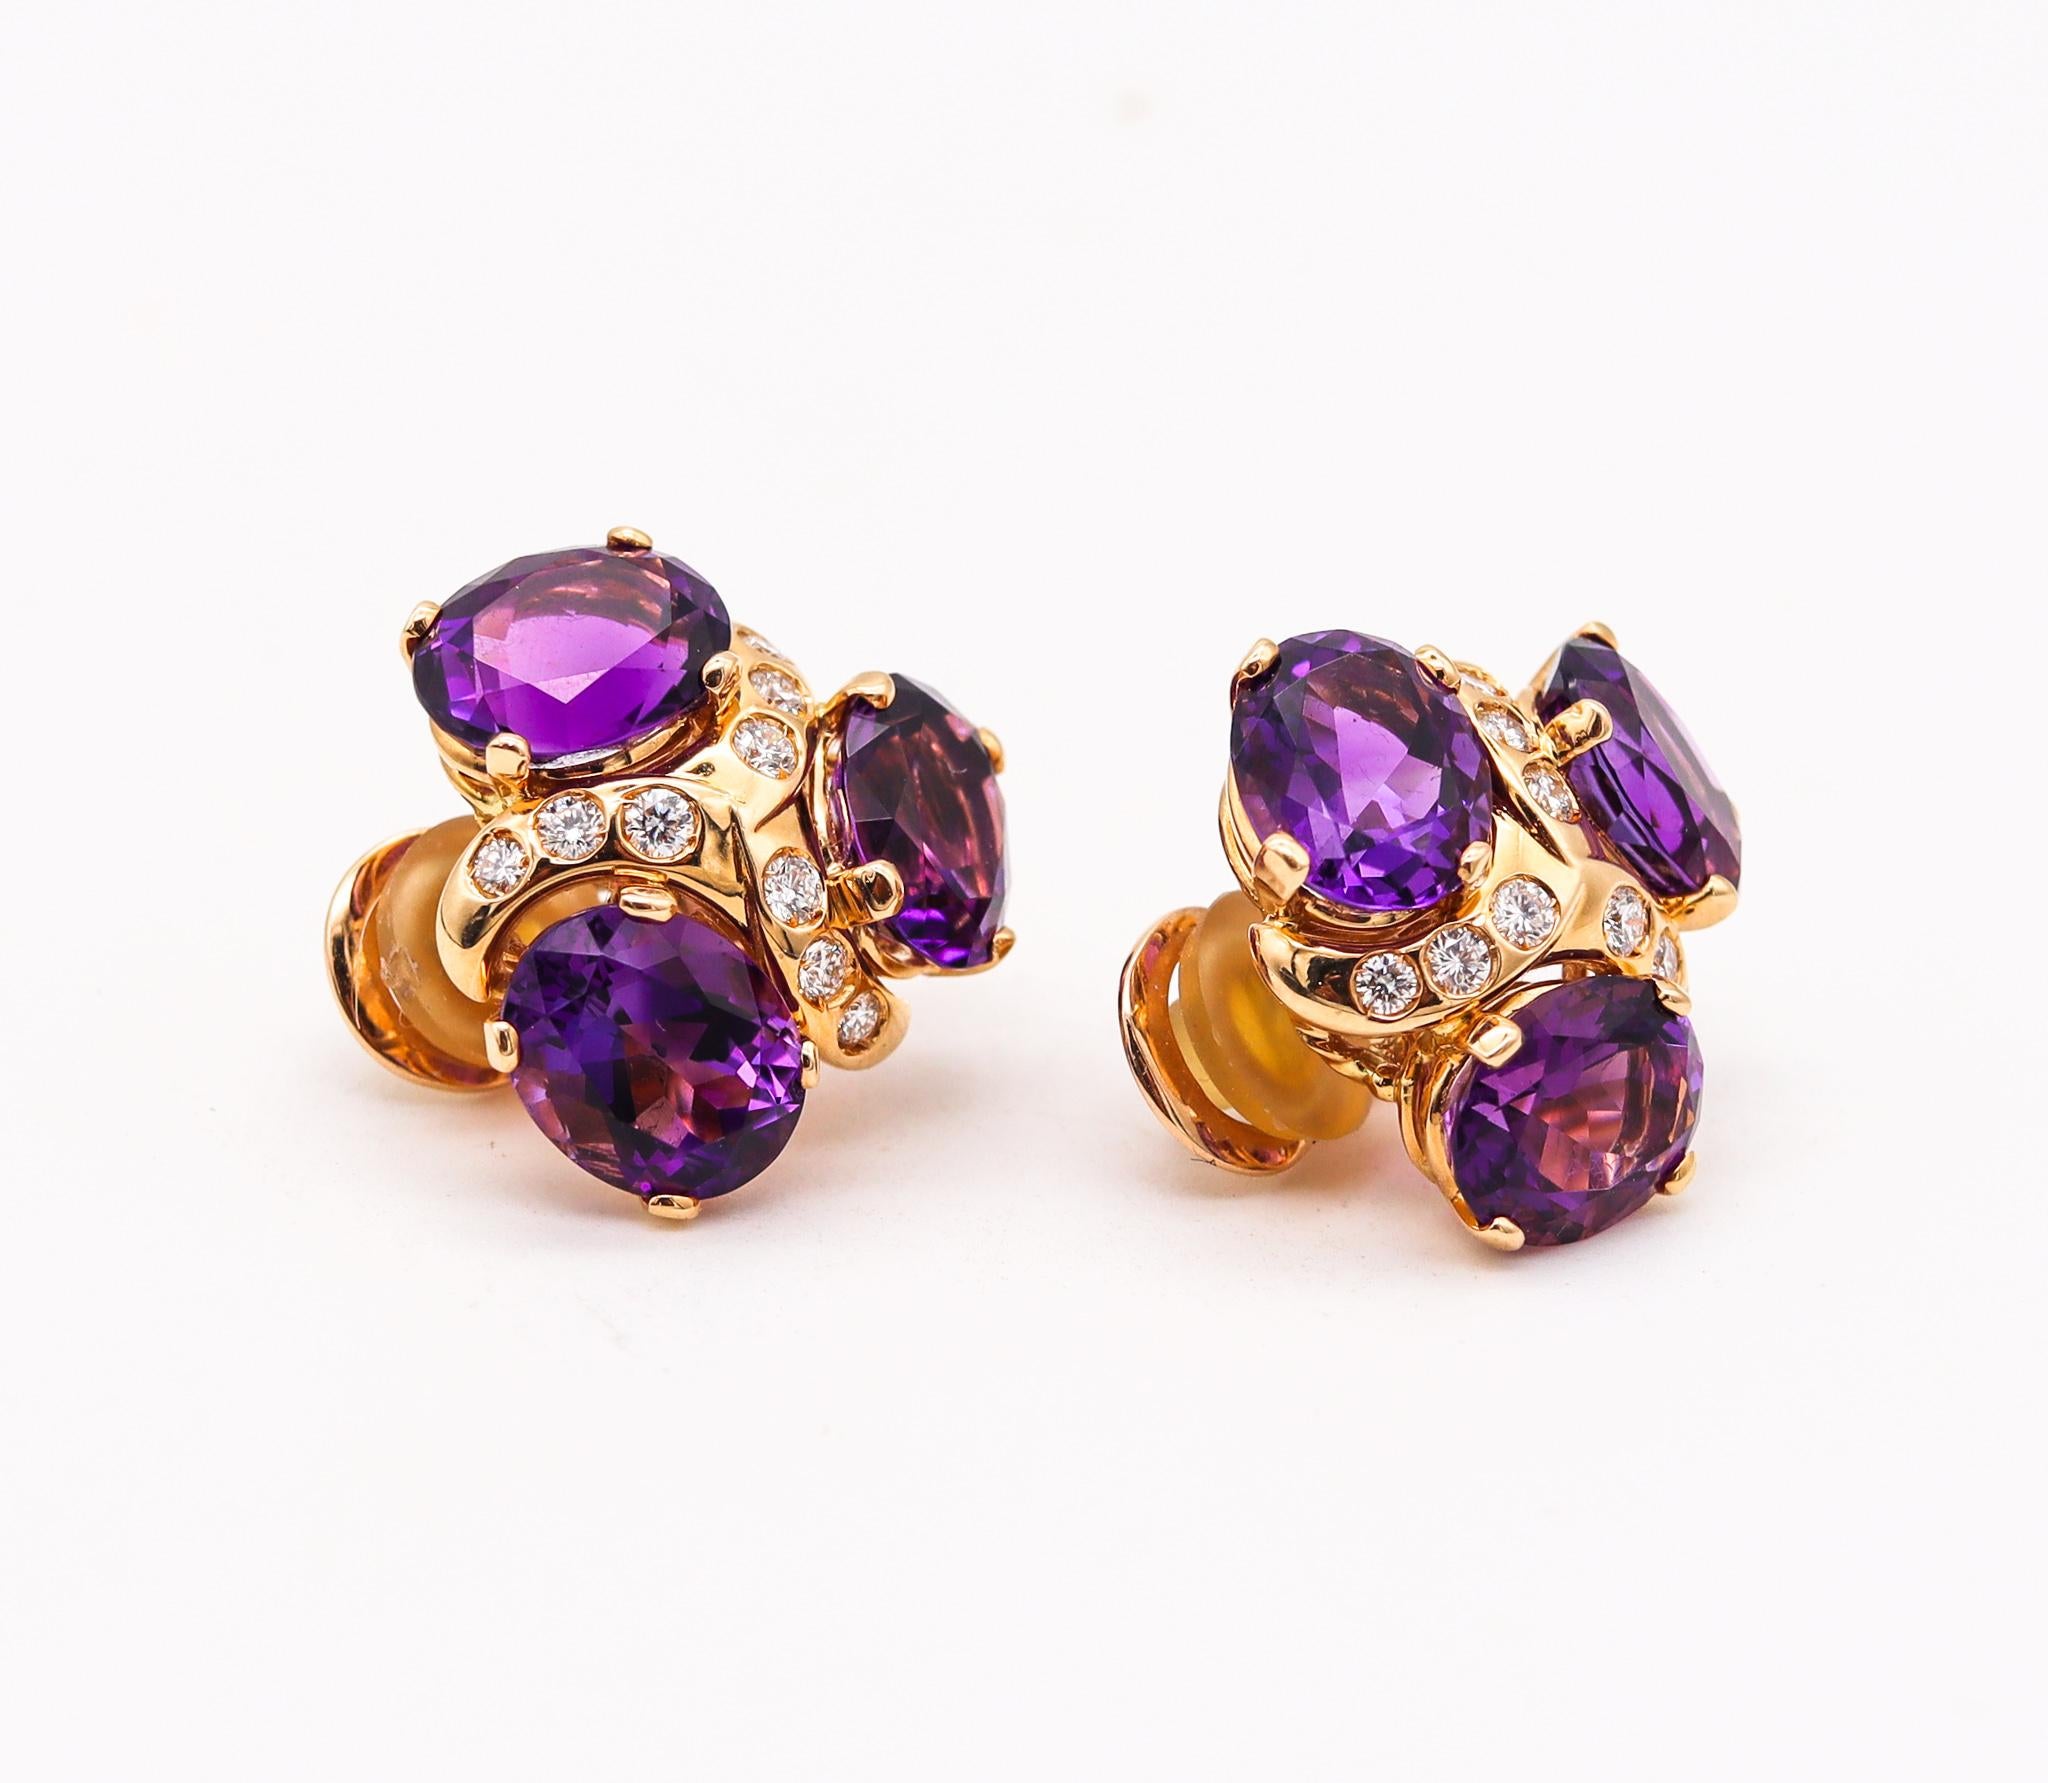 Oval Cut Verdura Milano Clips Earrings in 18Kt Gold with 17.14 Cts in Diamonds & Amethyst